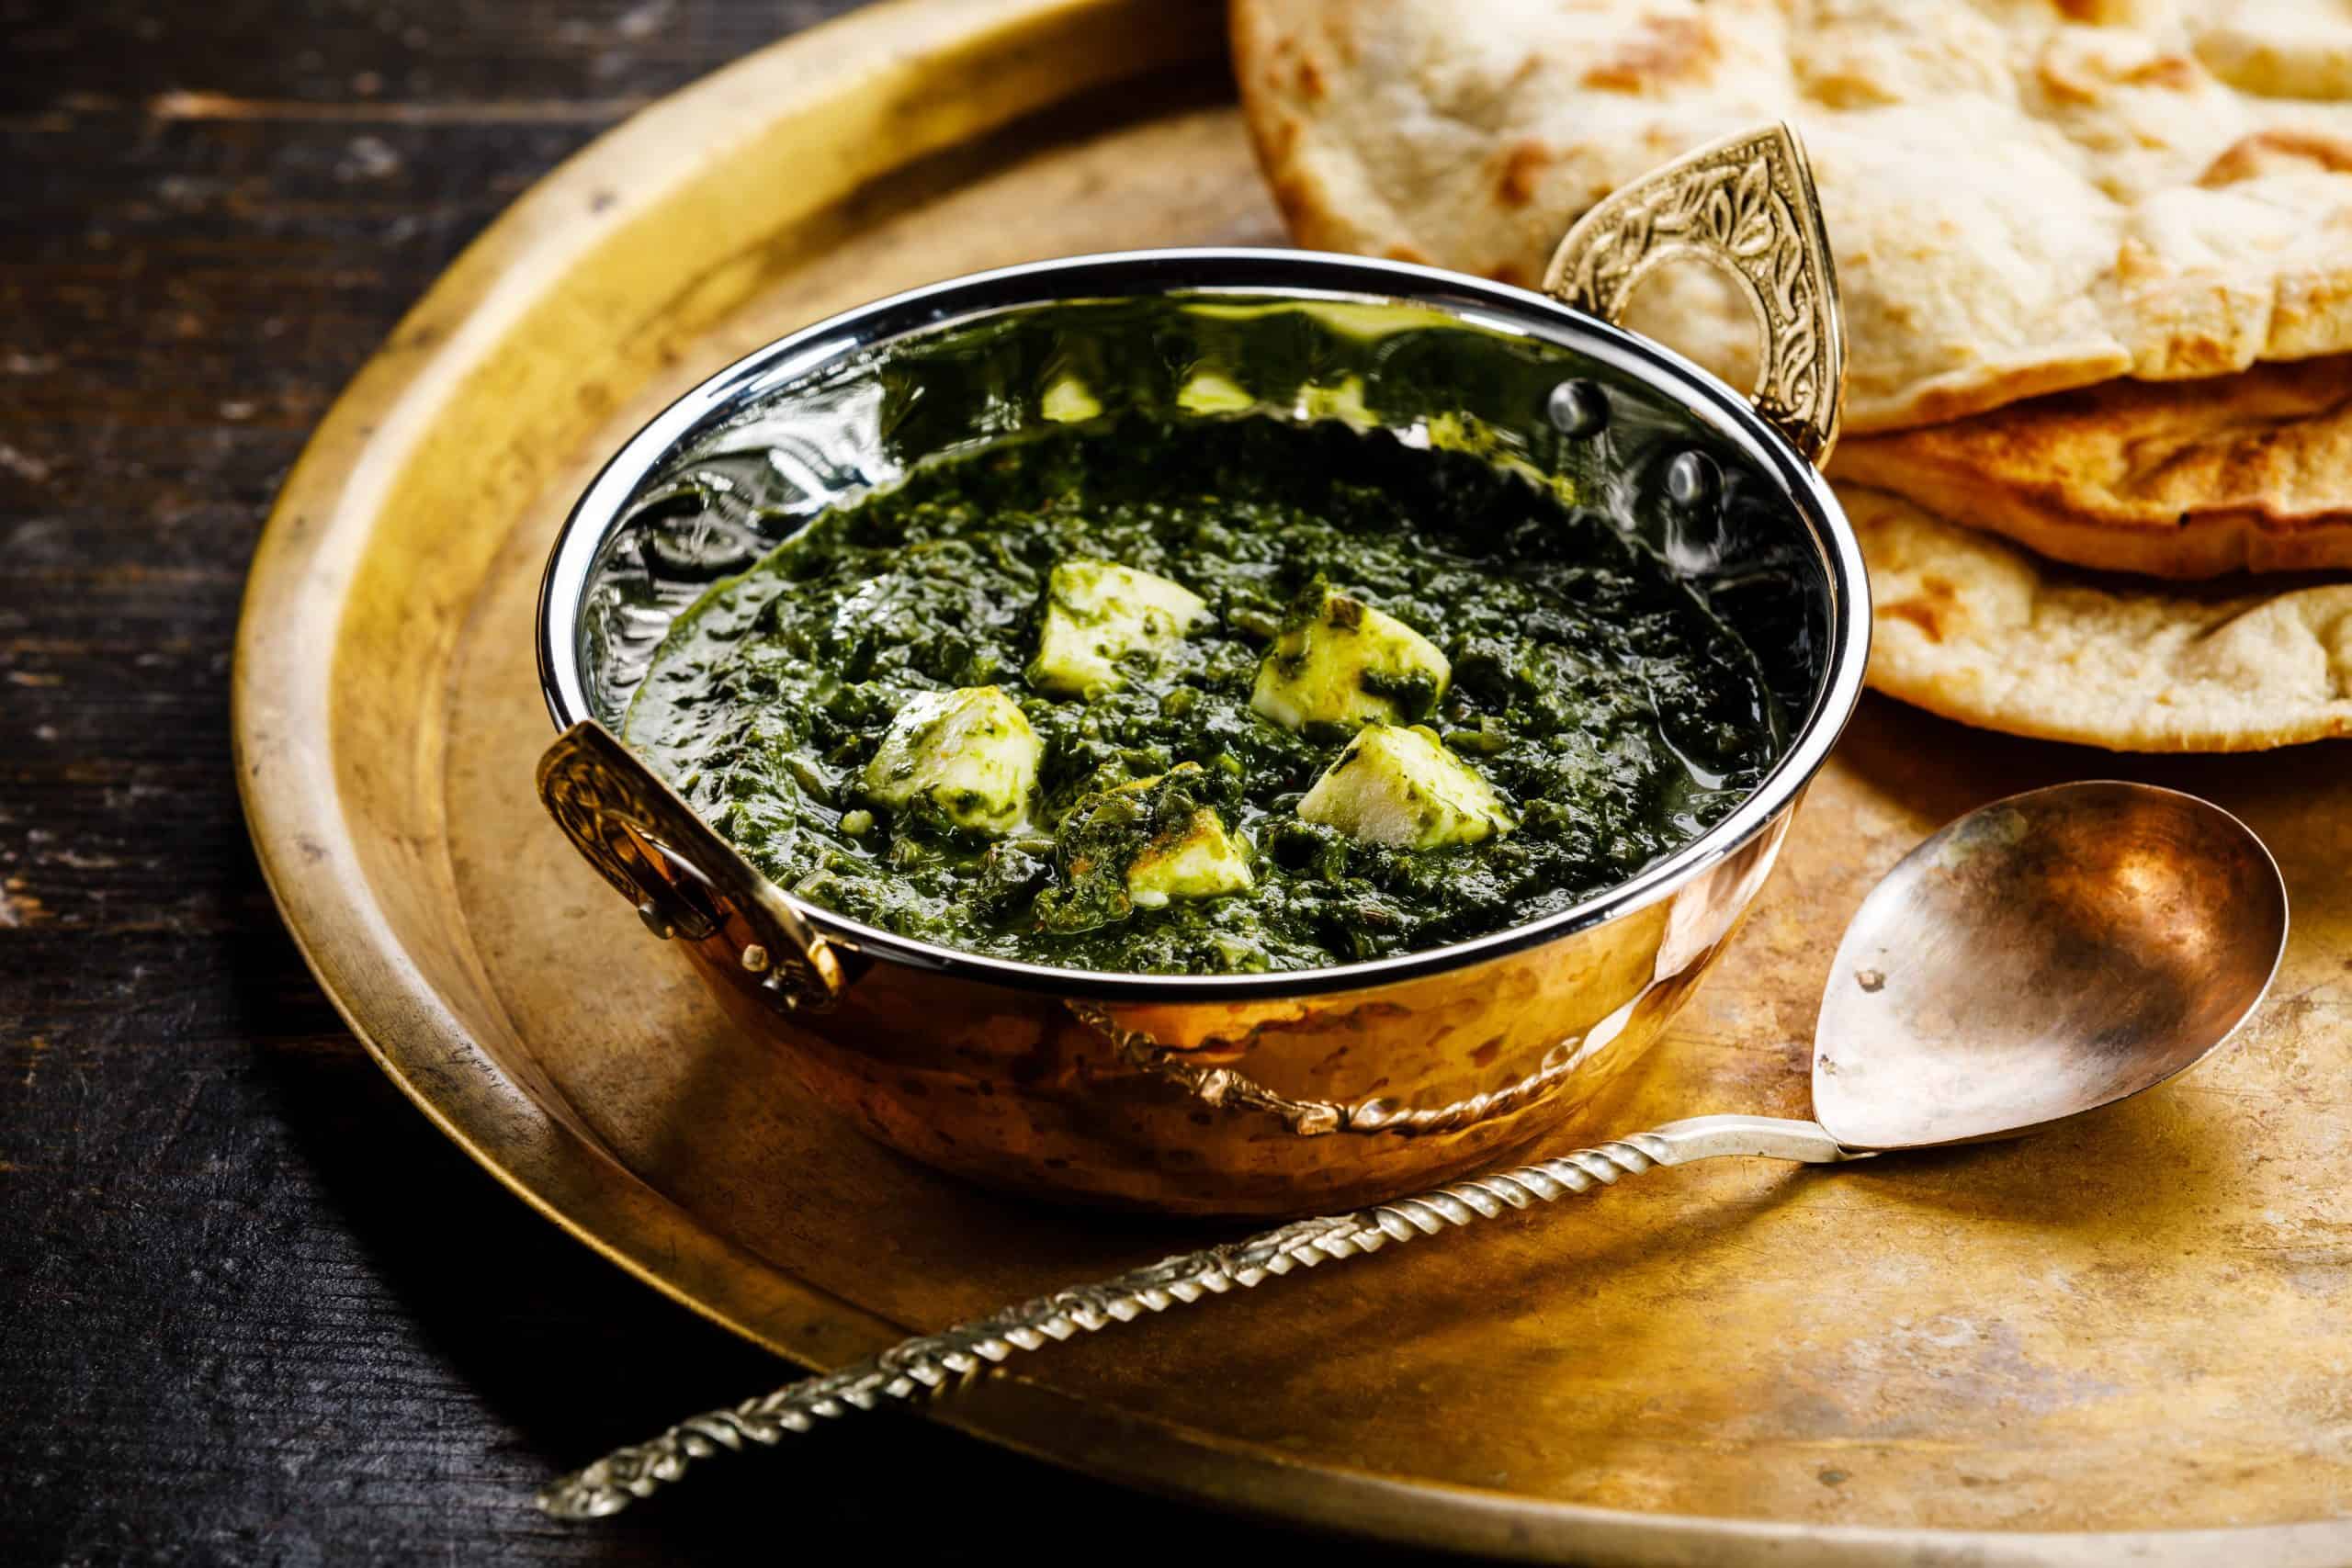 palak paneer in a metal bowl on a metal tray with a spoon and naan bread, shot from a low angle